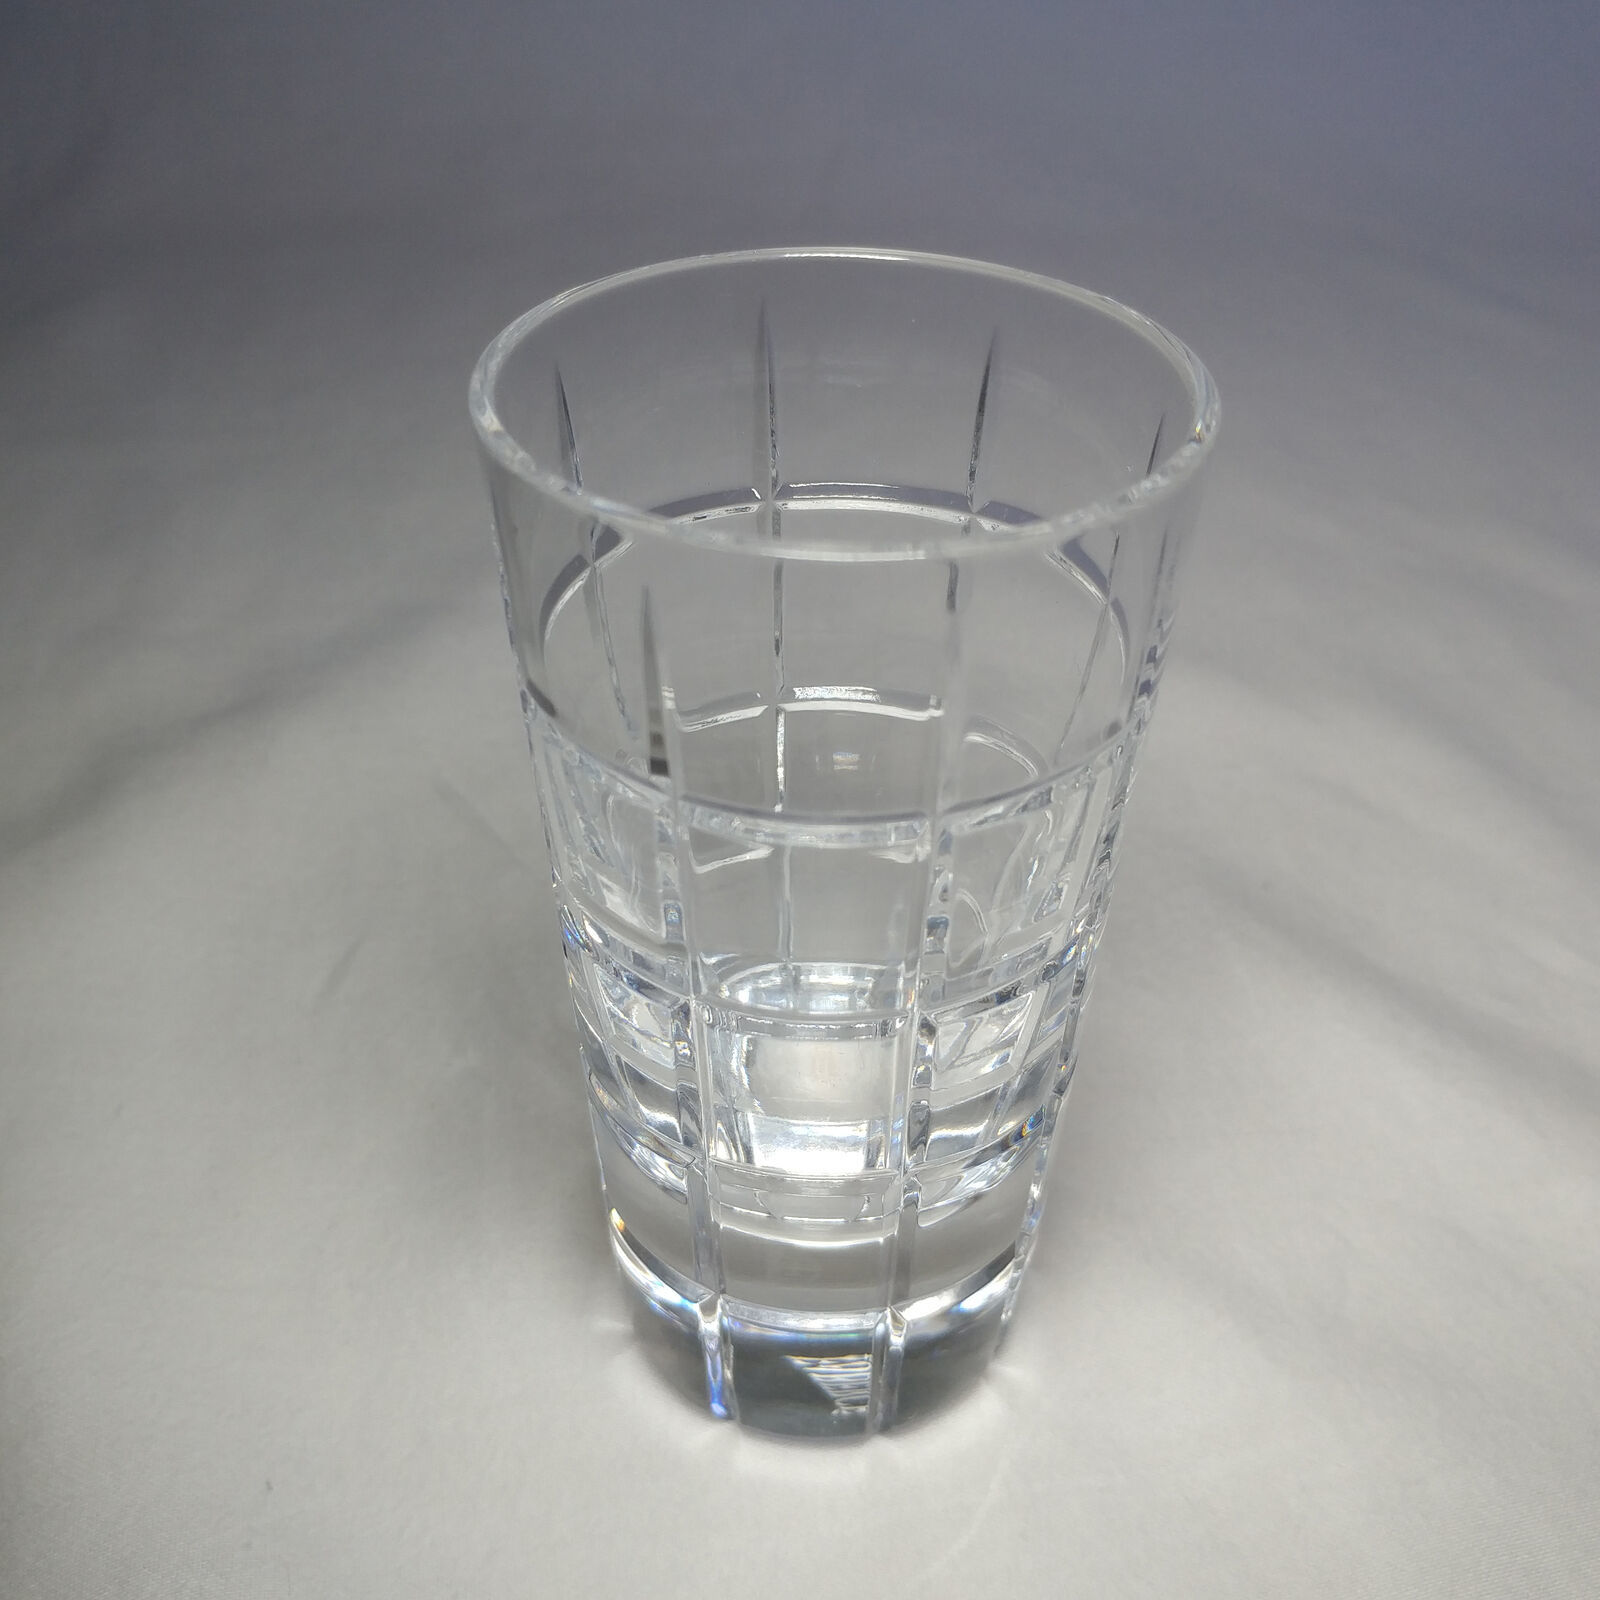 Primary image for FABERGE METROPOLITAN CLEAR CRYSTAL SHOT GLASS